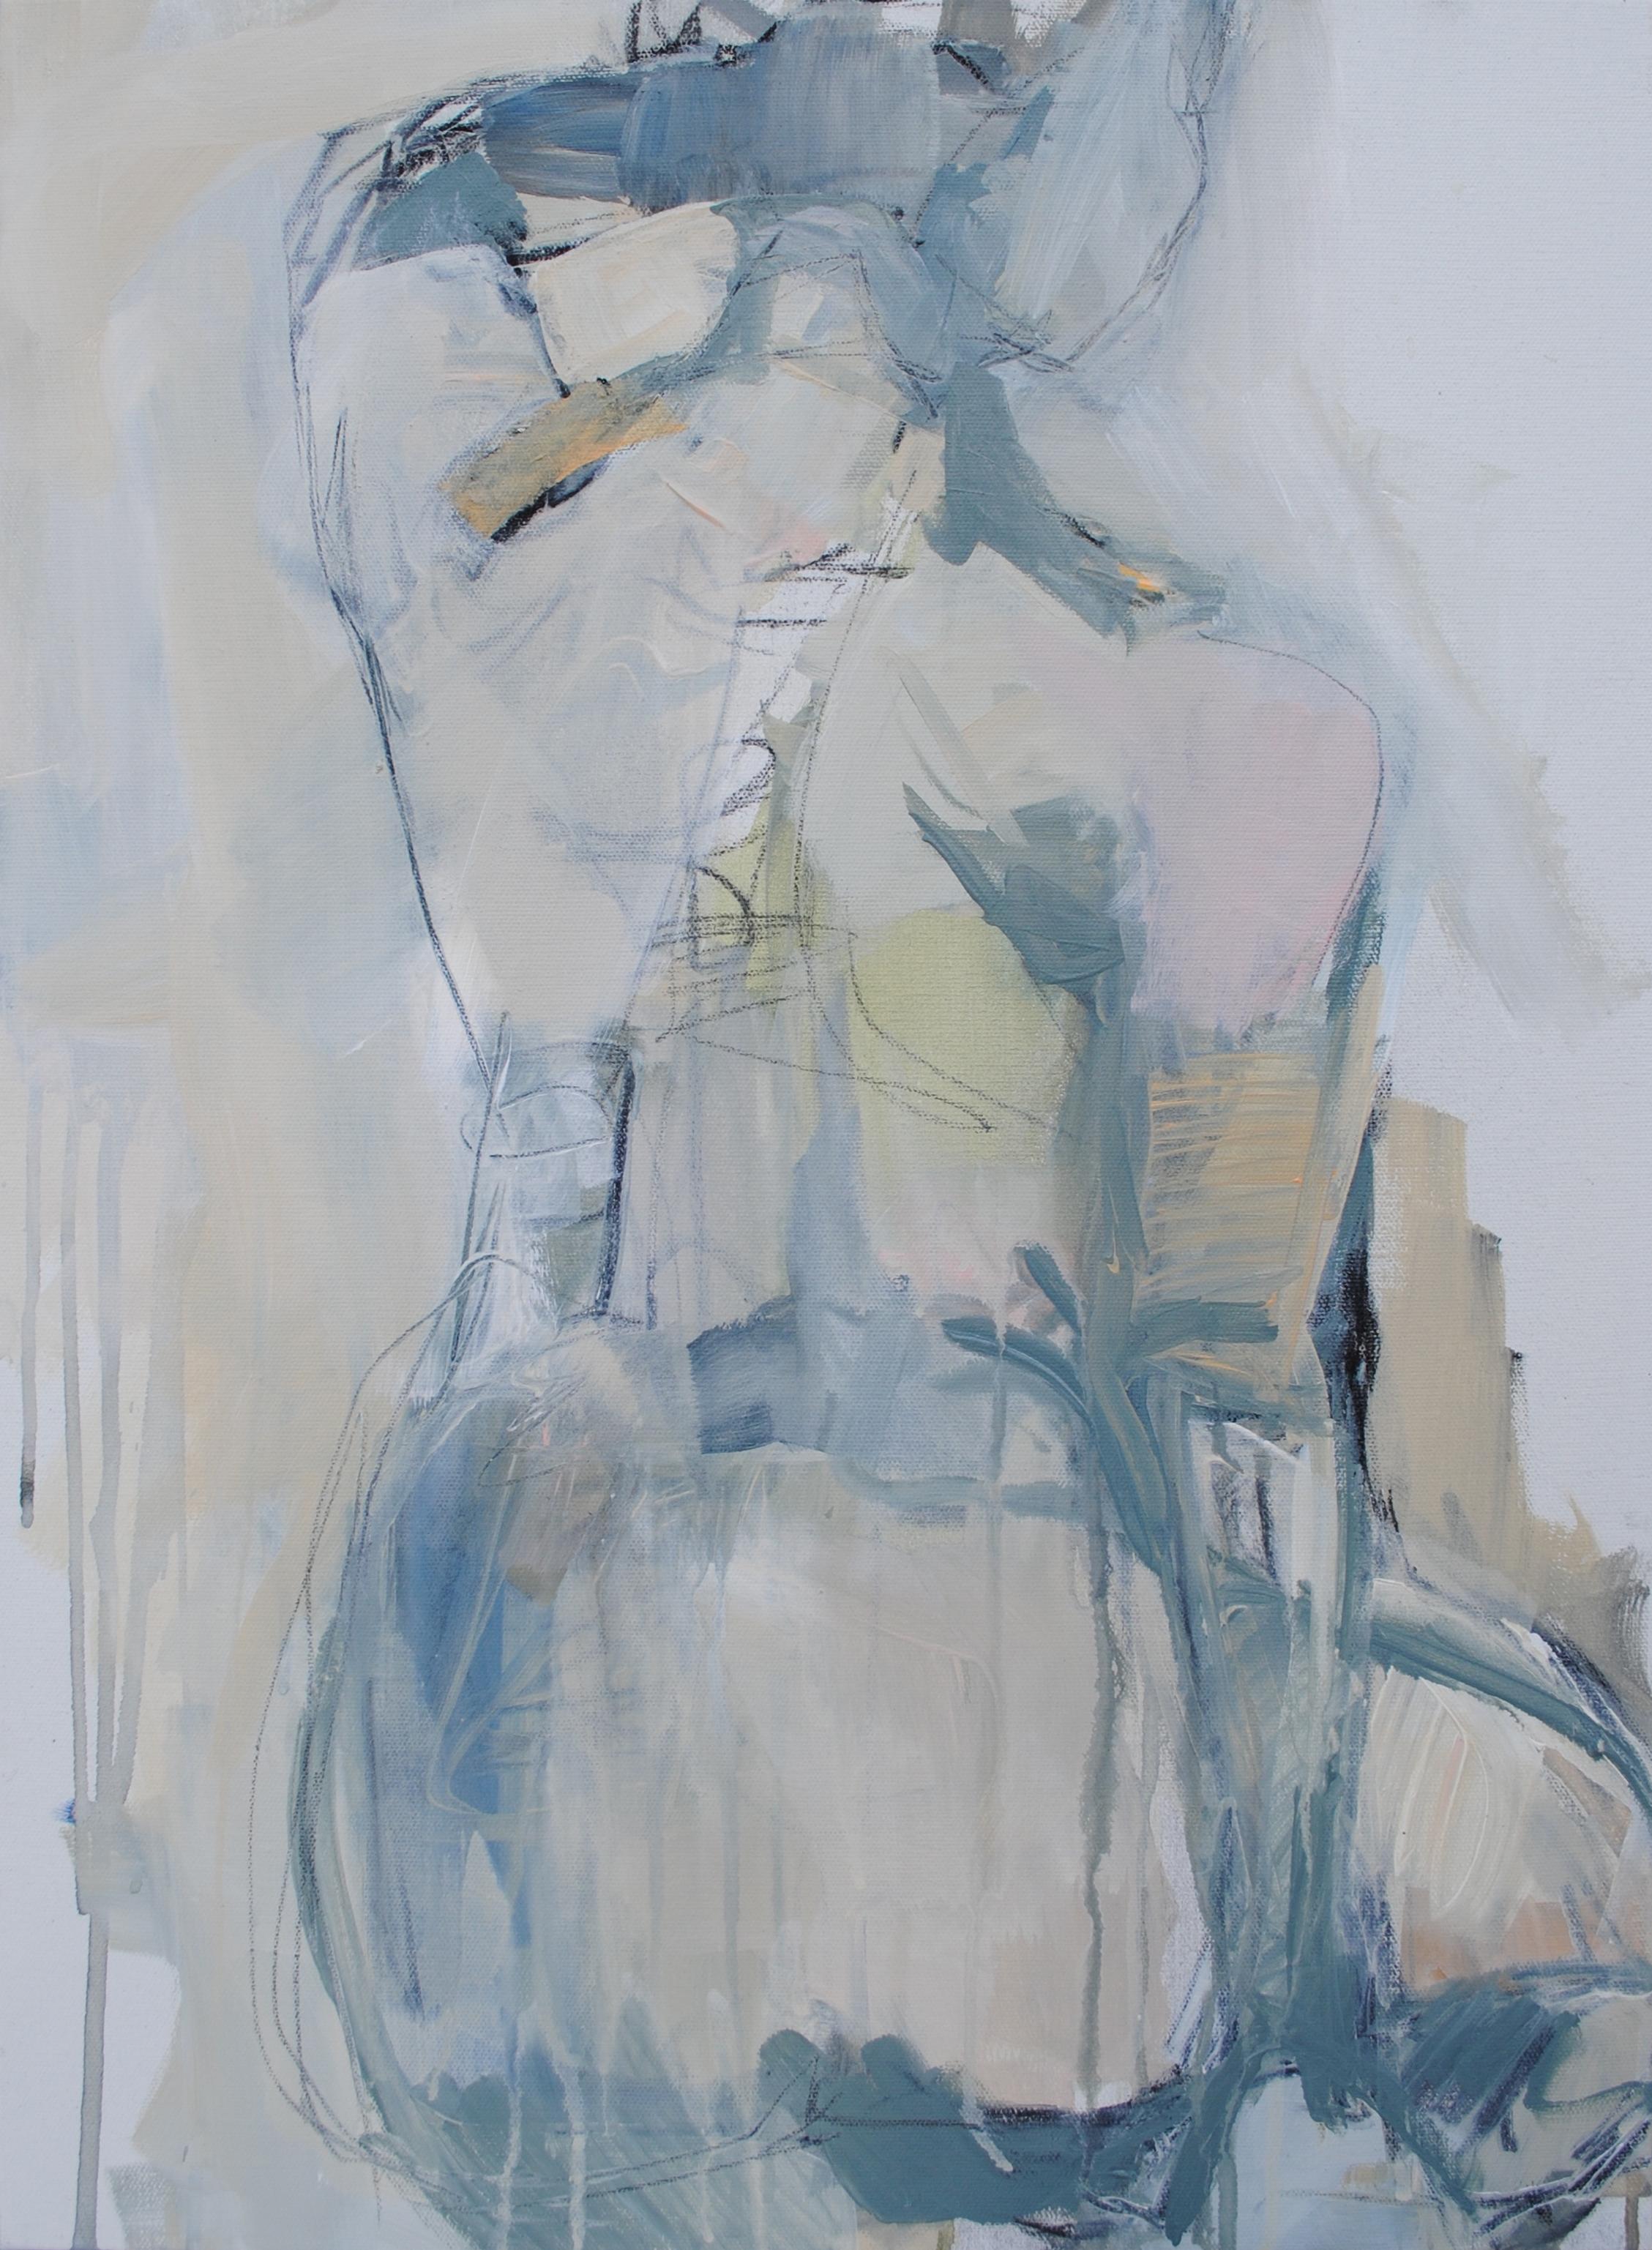 Kelley B. Ogburn Nude Painting - Nothing More by Kelley Ogburn, Vertical Nude Mixed Media on Canvas Painting